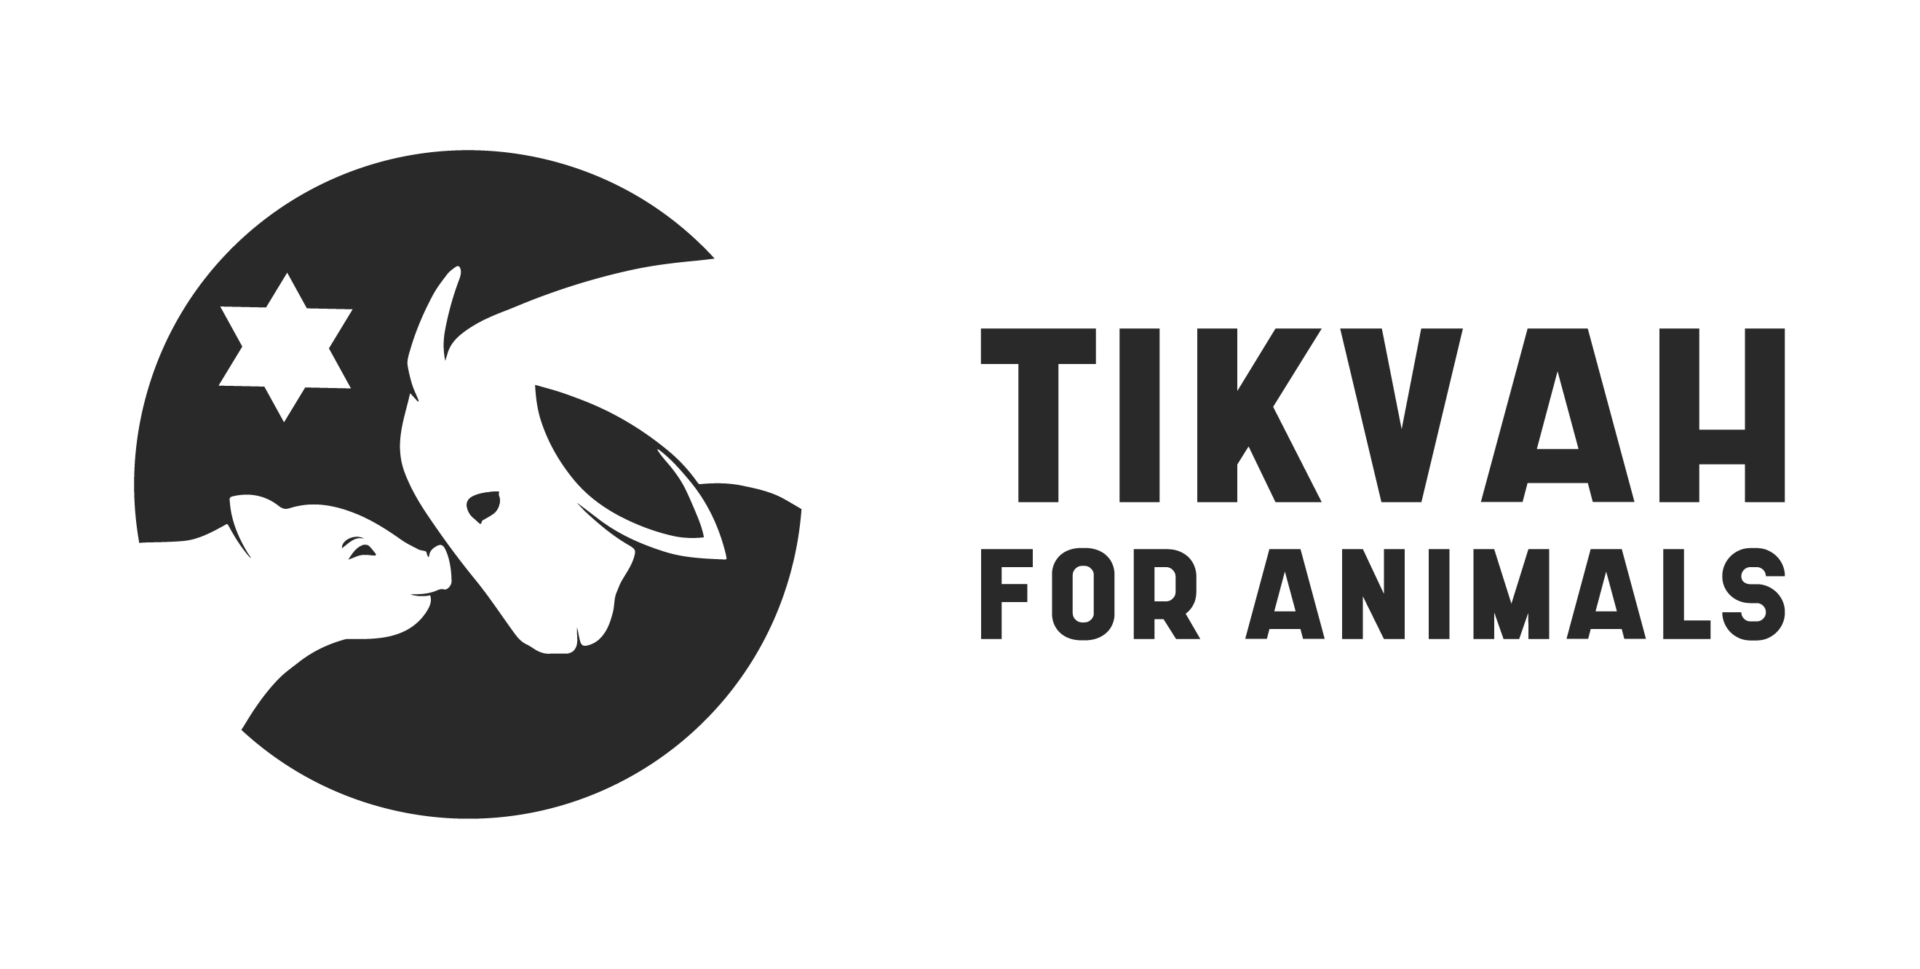 Tikvah for Animals